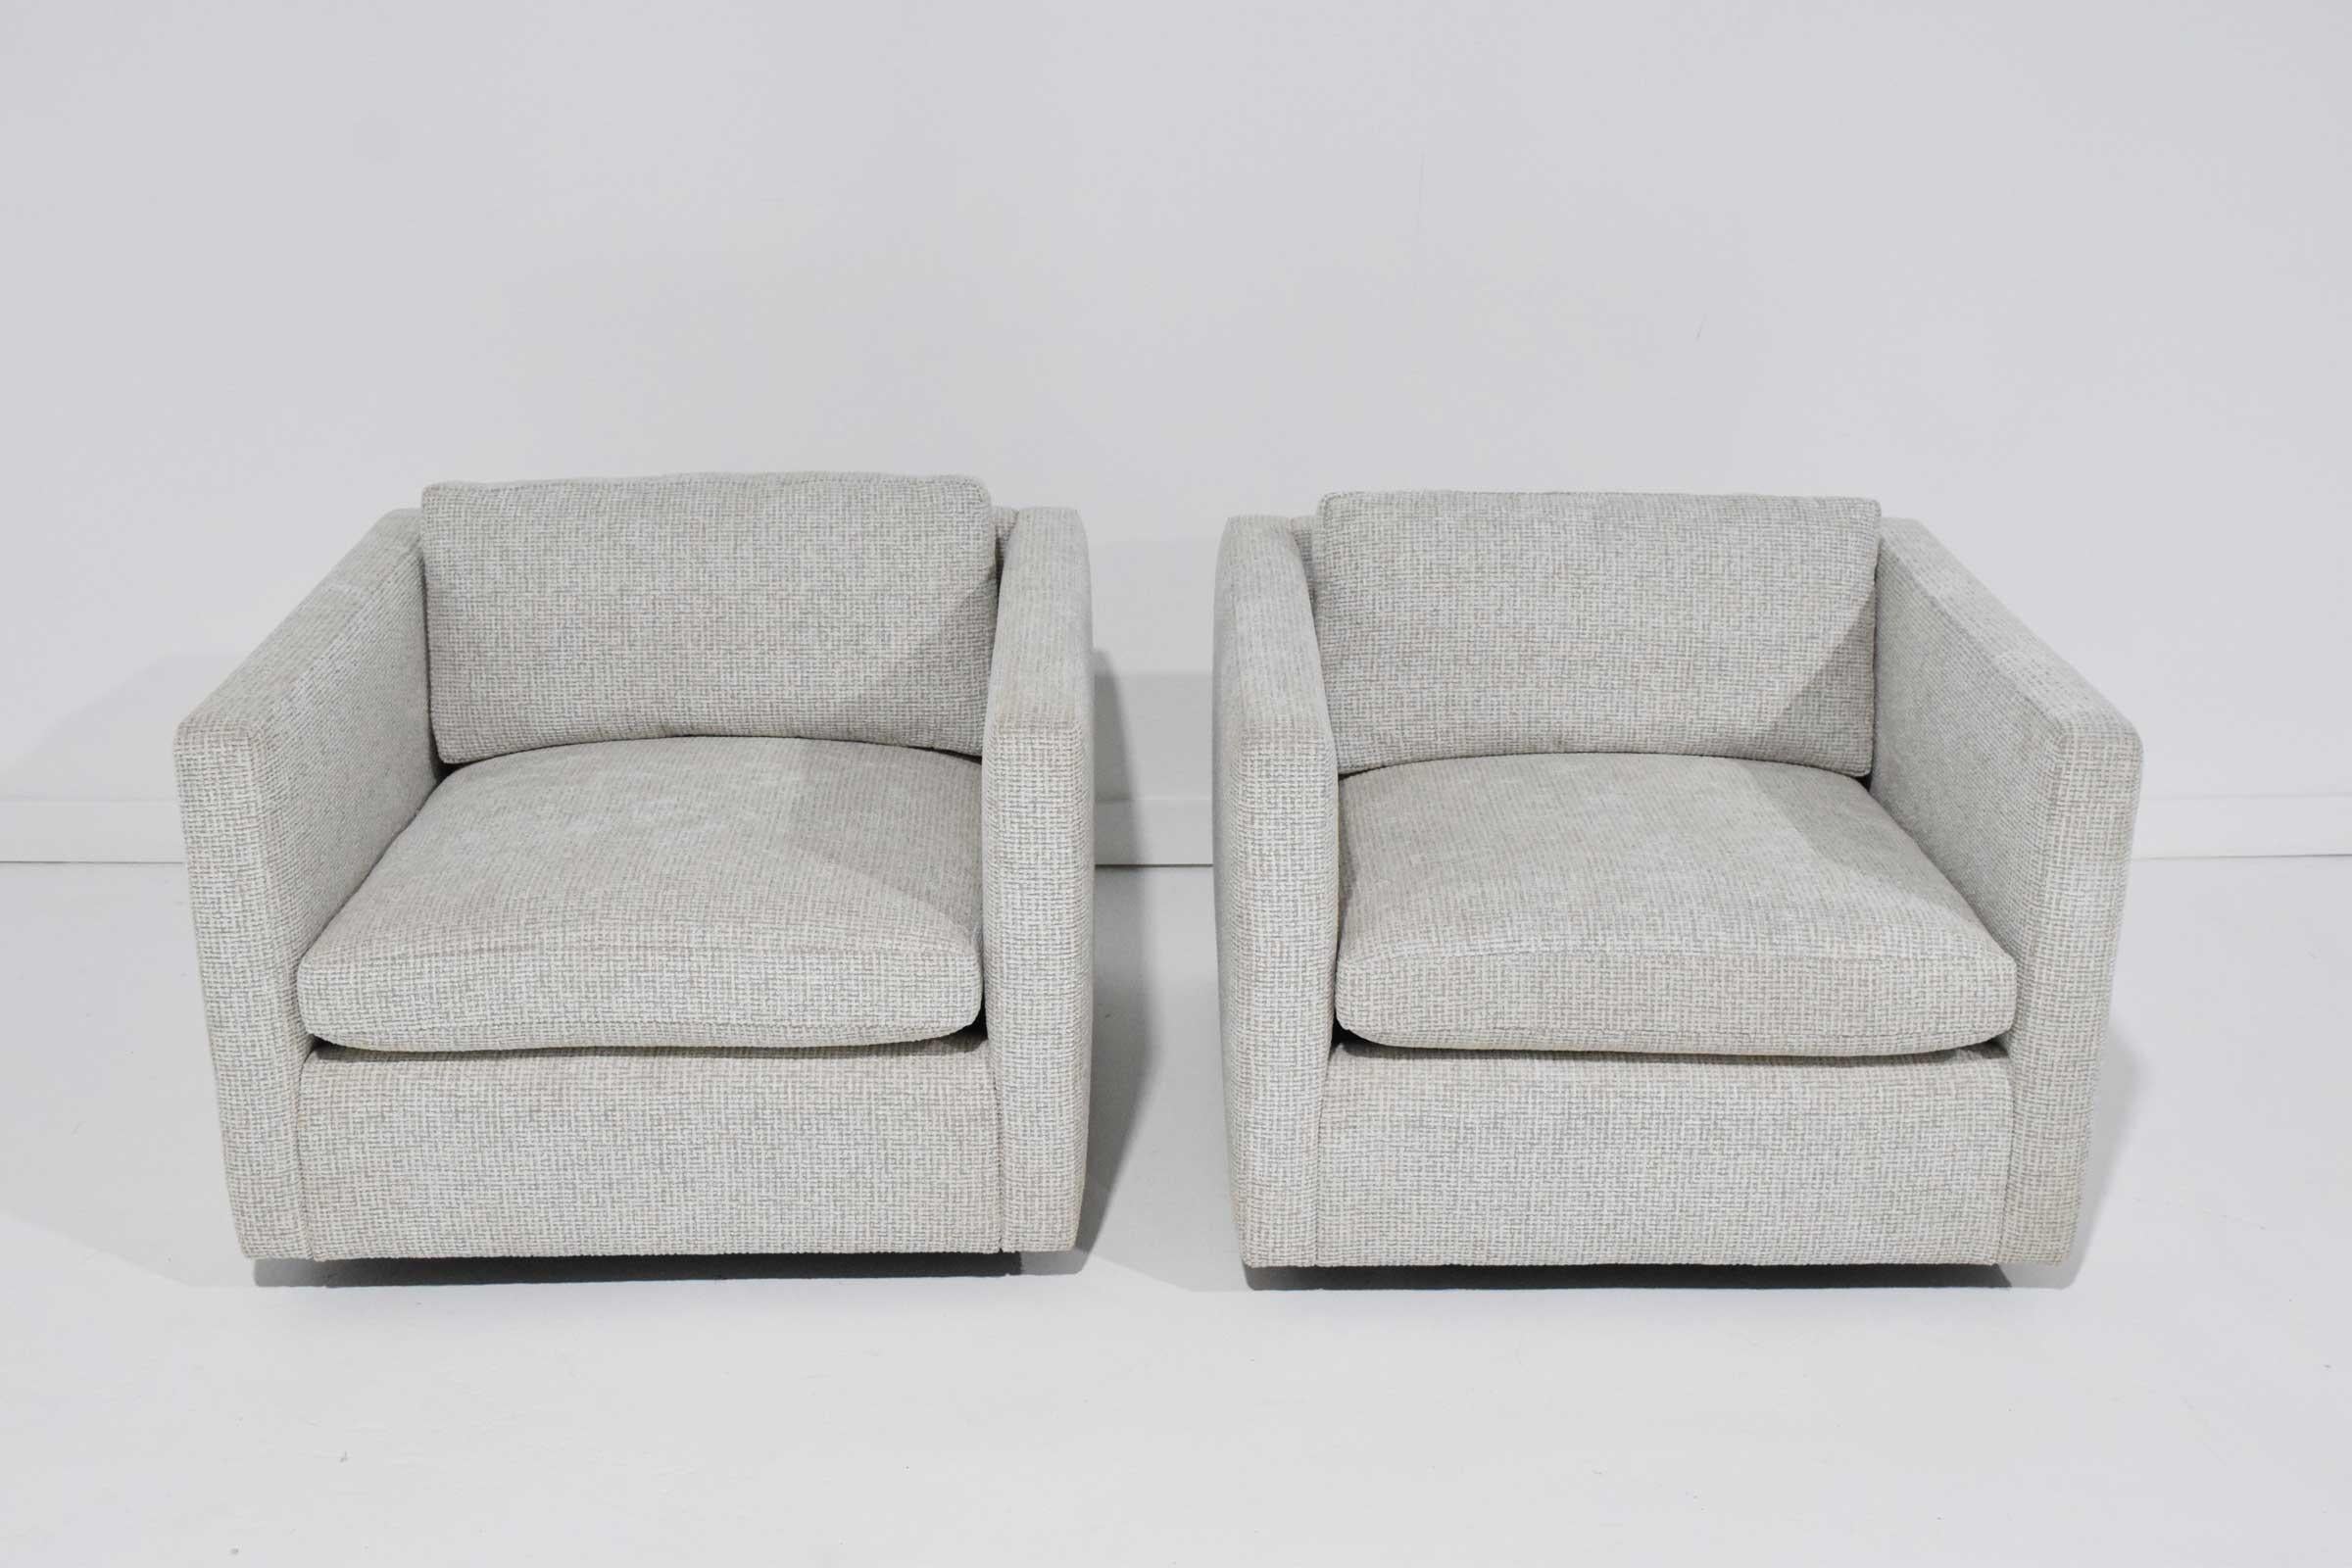 Mid-Century Modern Pair of Charles Pfister for Knoll Lounge Chairs in Taupe/White Upholstery